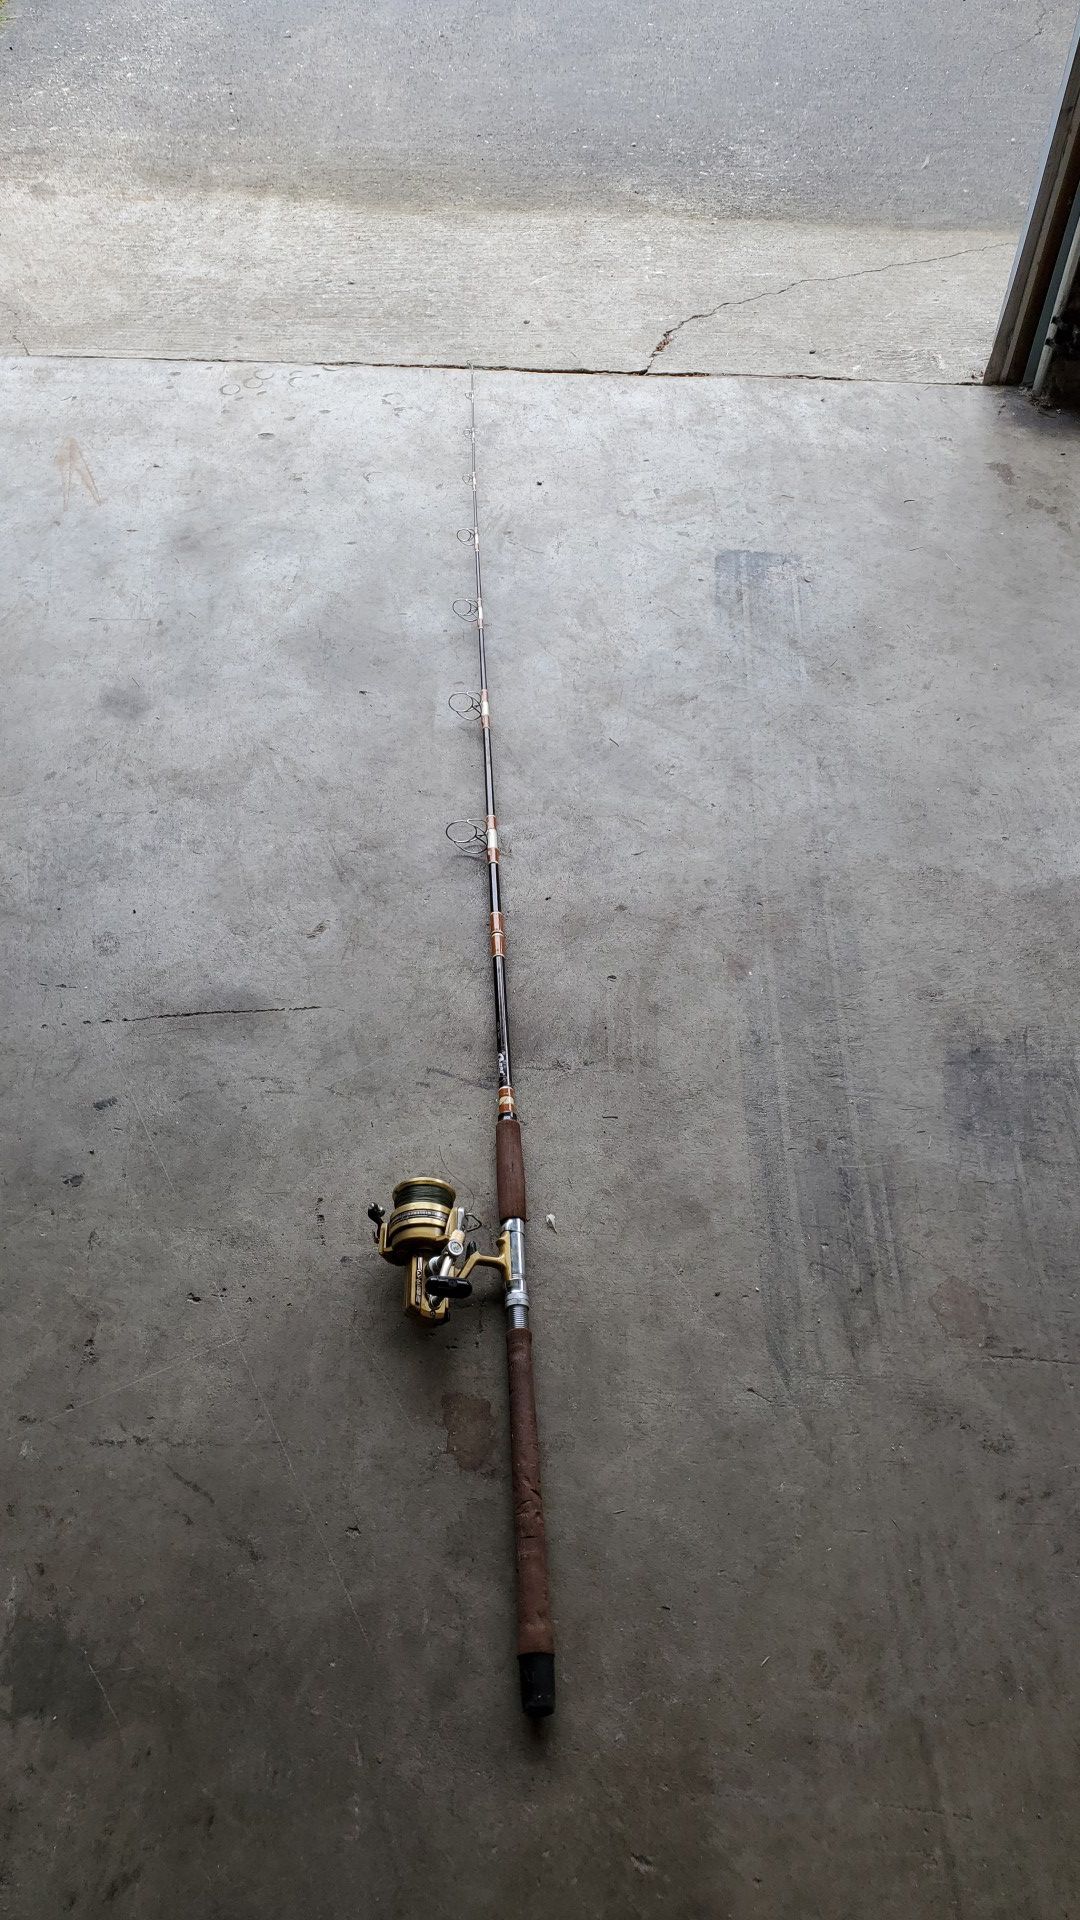 Sabre fishing rod and reel